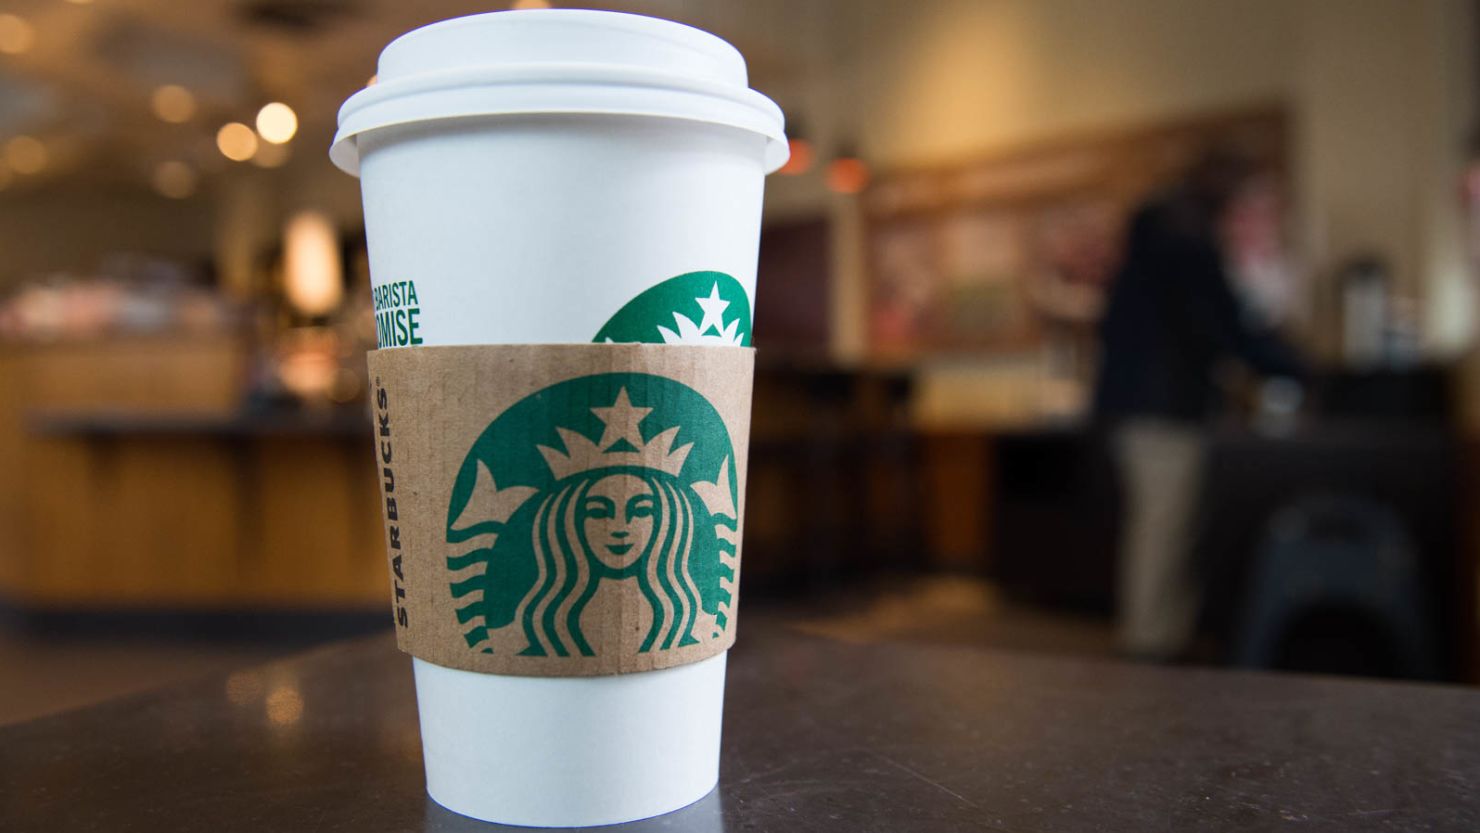 Science explains why plastic cups make your coffee taste weird